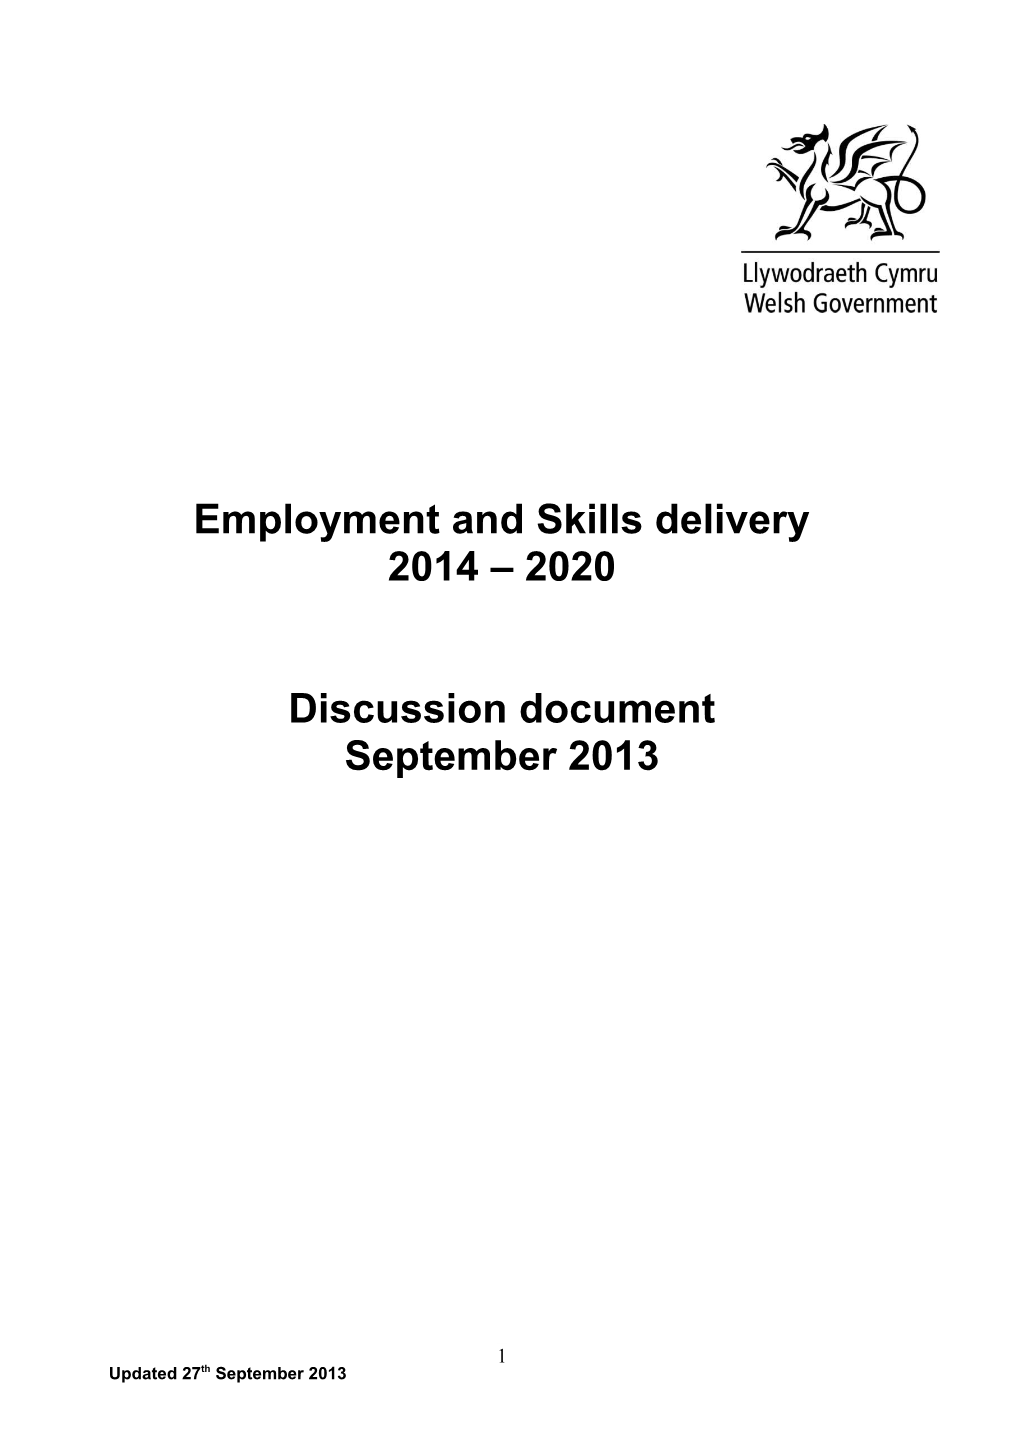 Employment and Skills Delivery Model